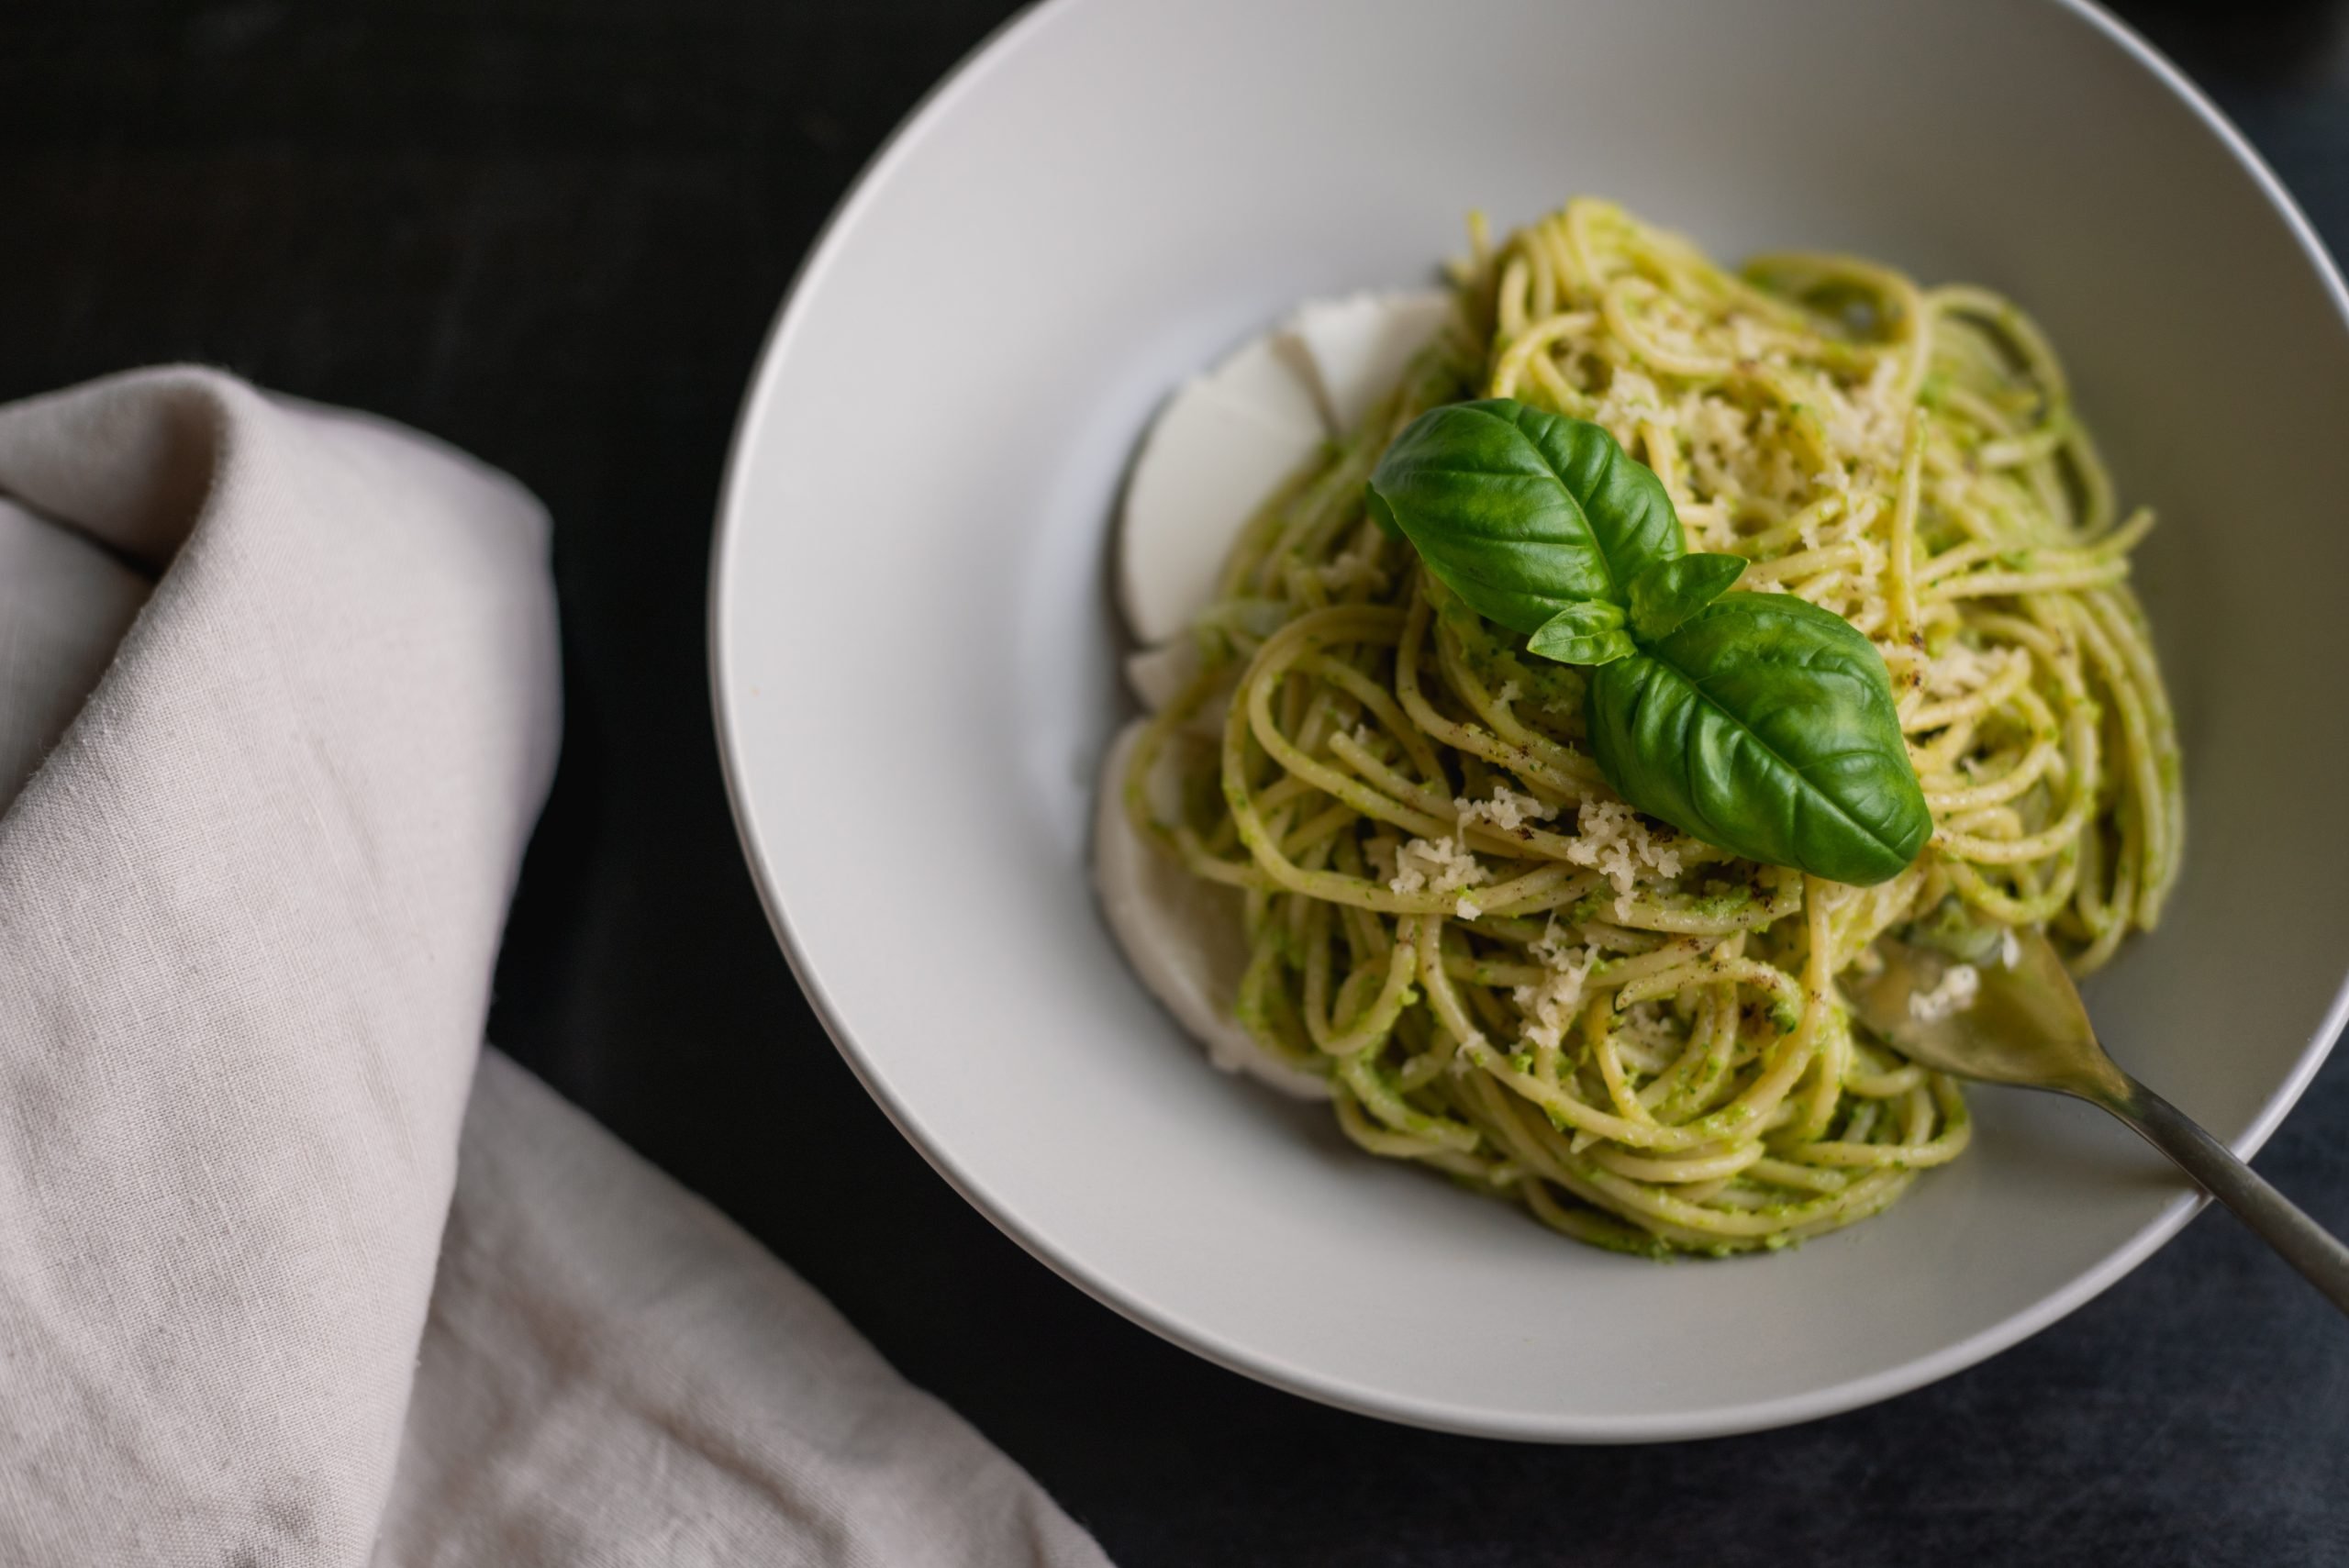 Spaghetti Moroccan Style With Spinach and Walnut Pesto - Vegetarian and Vegan Dishes in Morocco